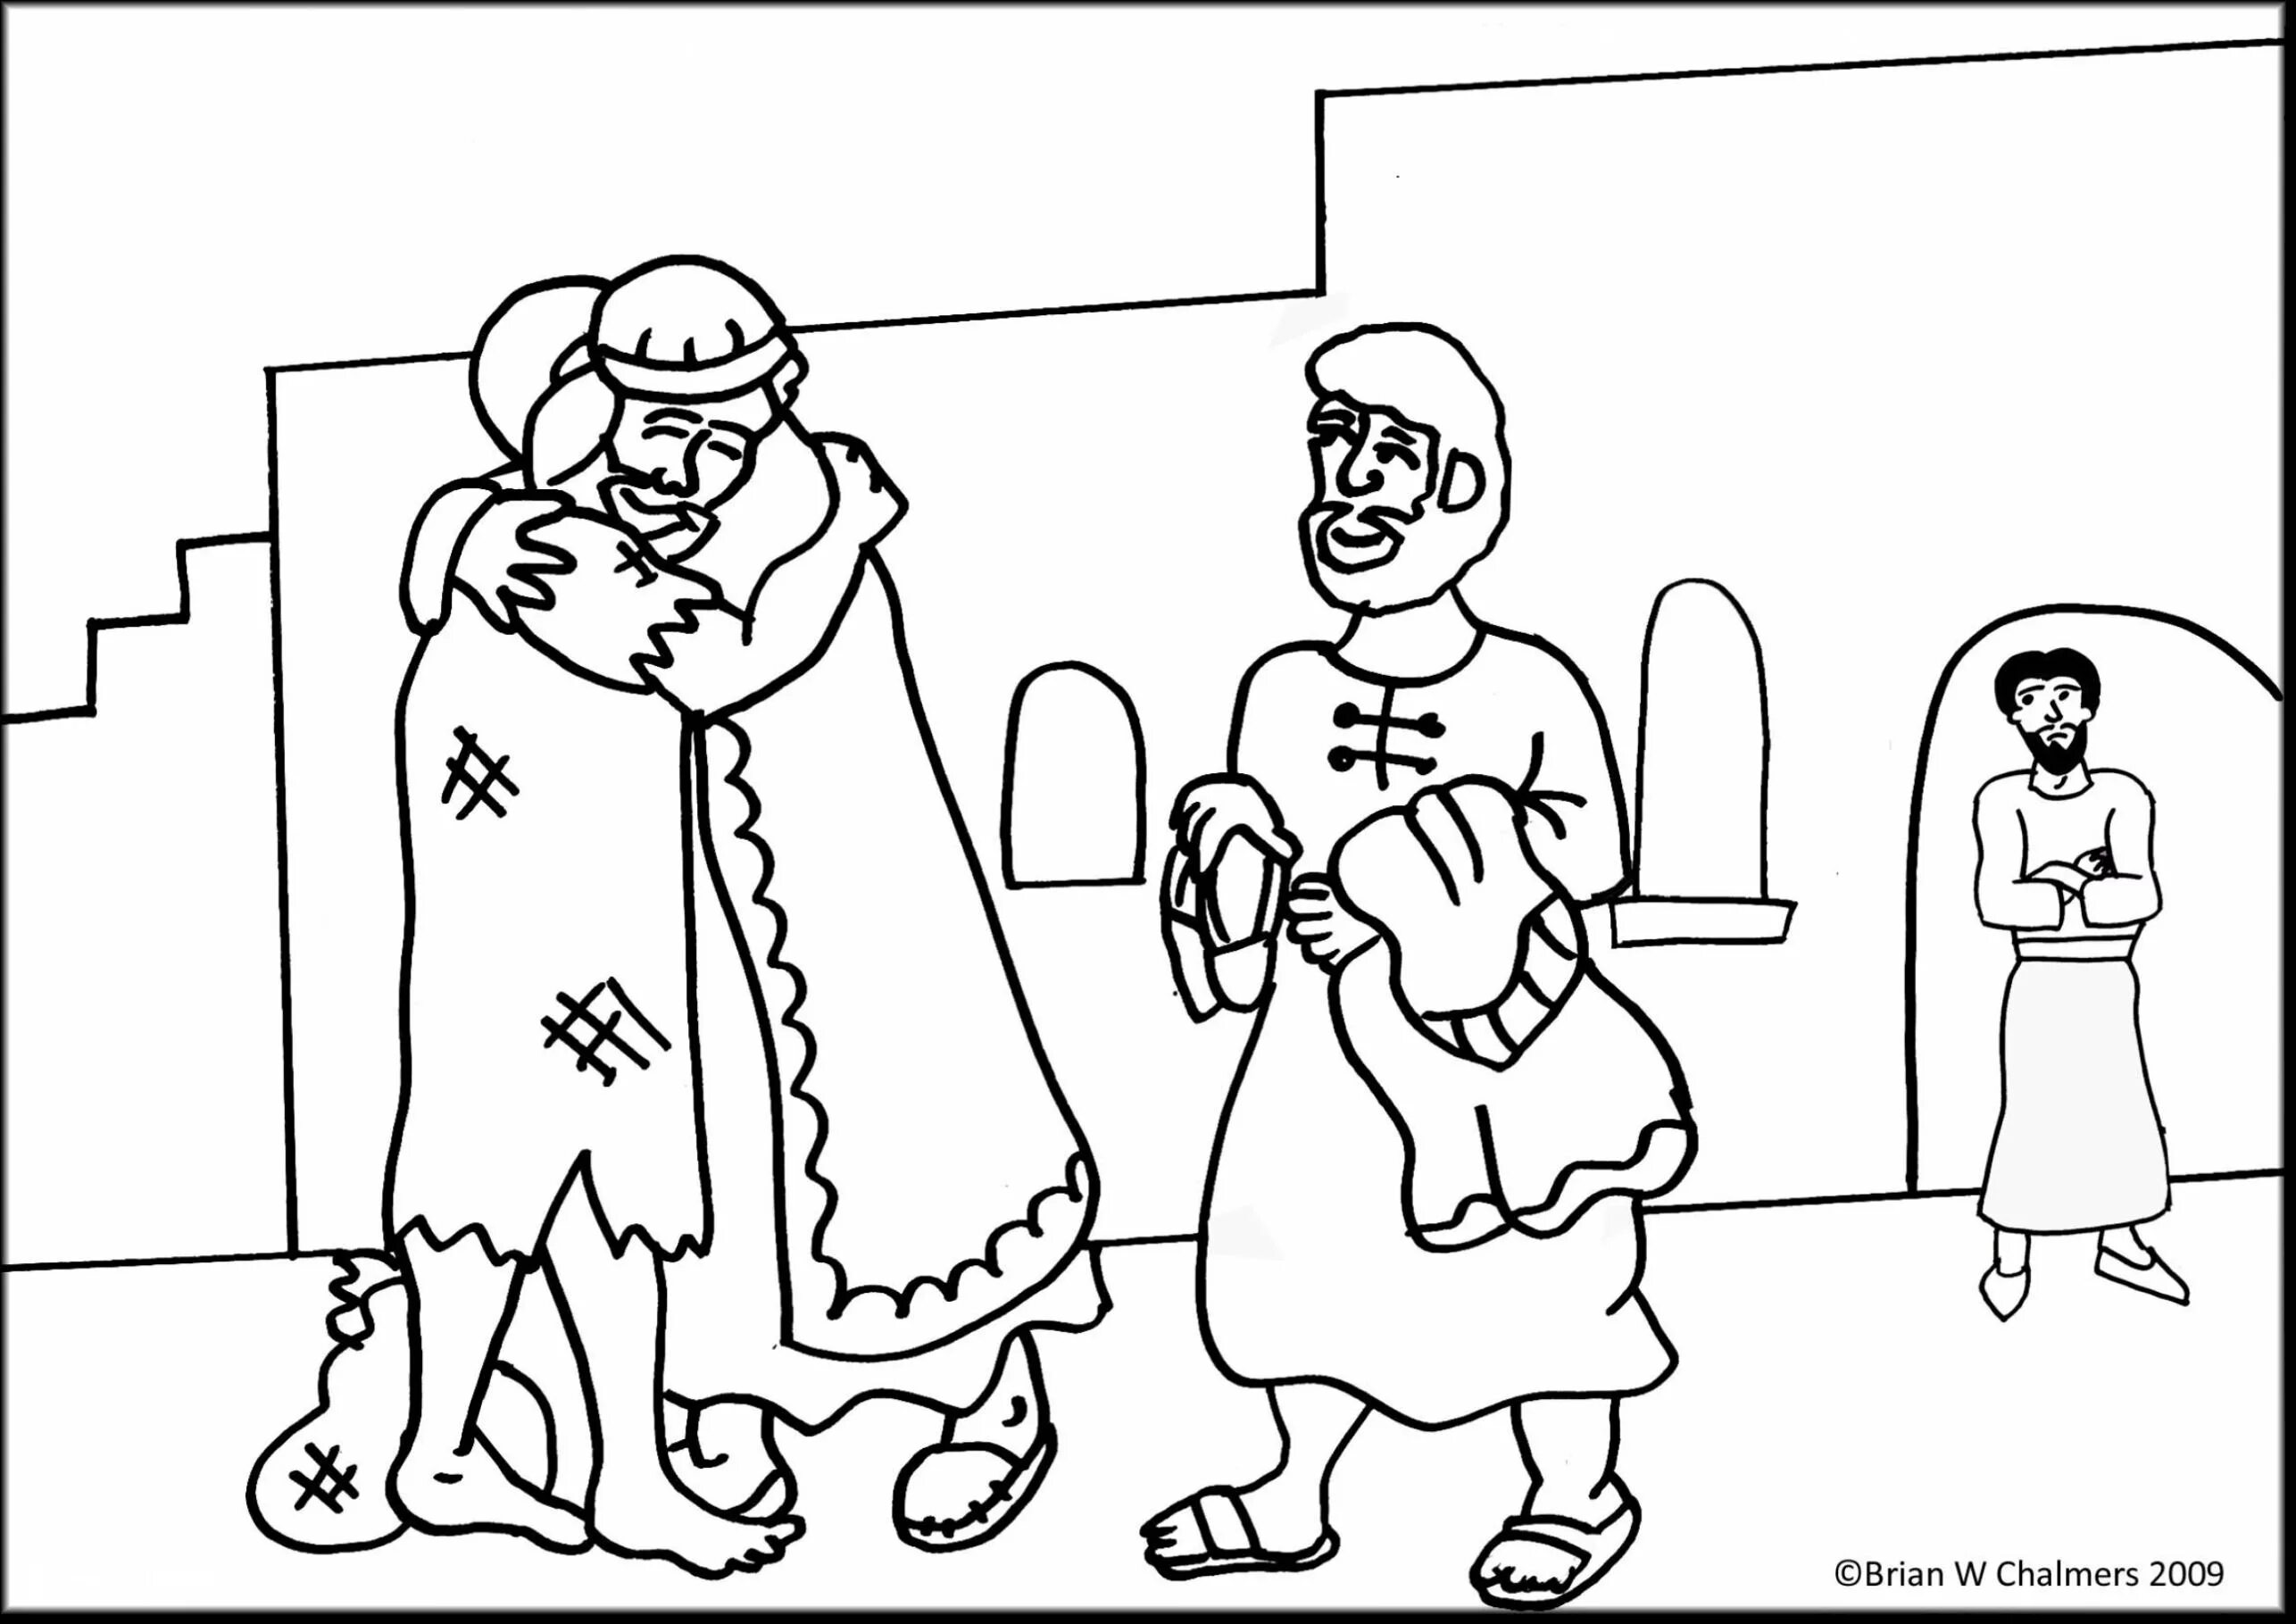 Coloring book of the week of the bubbly prodigal son